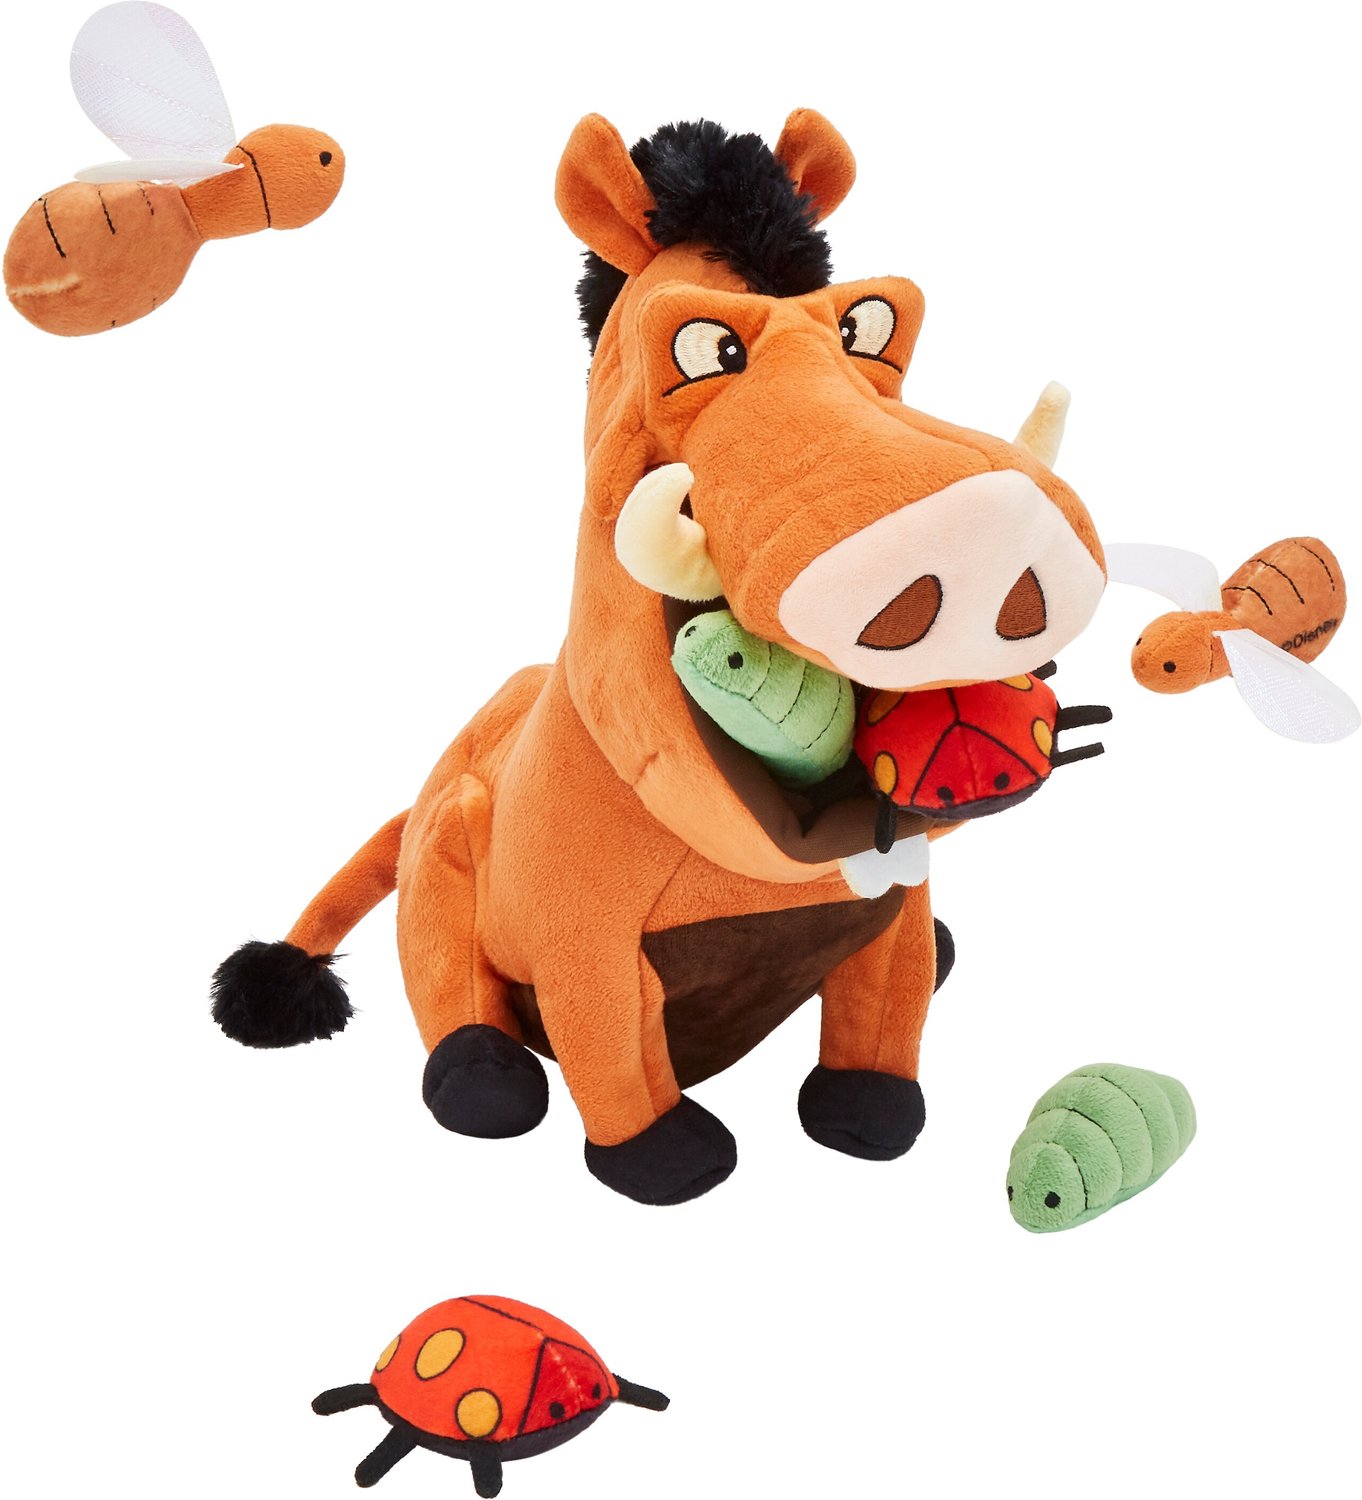 Disney Pumbaa Hide and Seek Puzzle Plush Squeaky Dog Toy